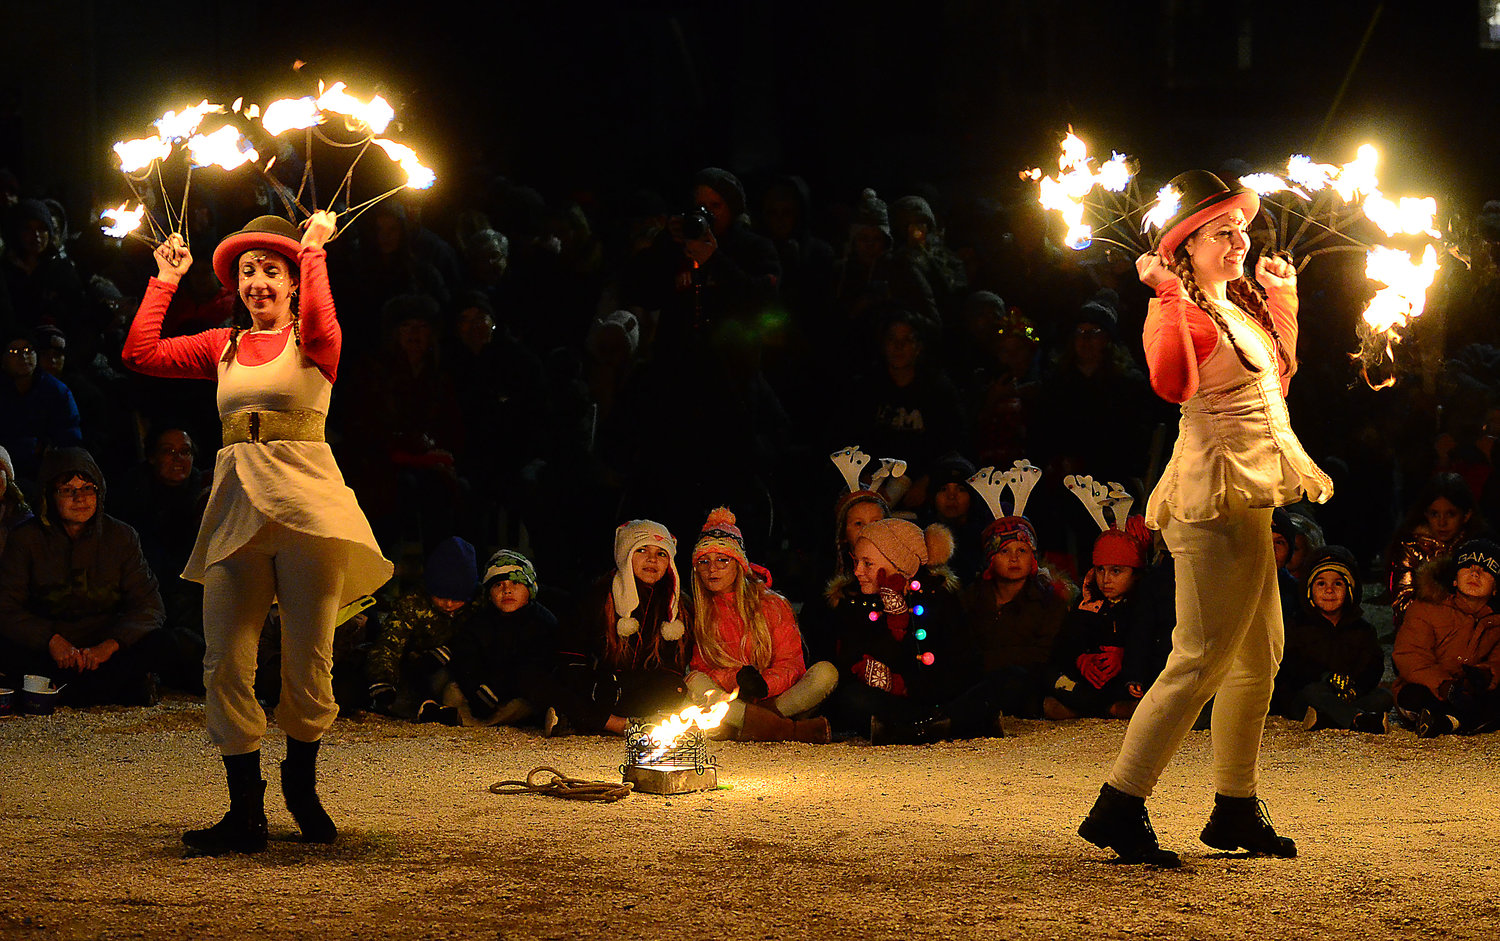 Fire dancers captivate an audience.